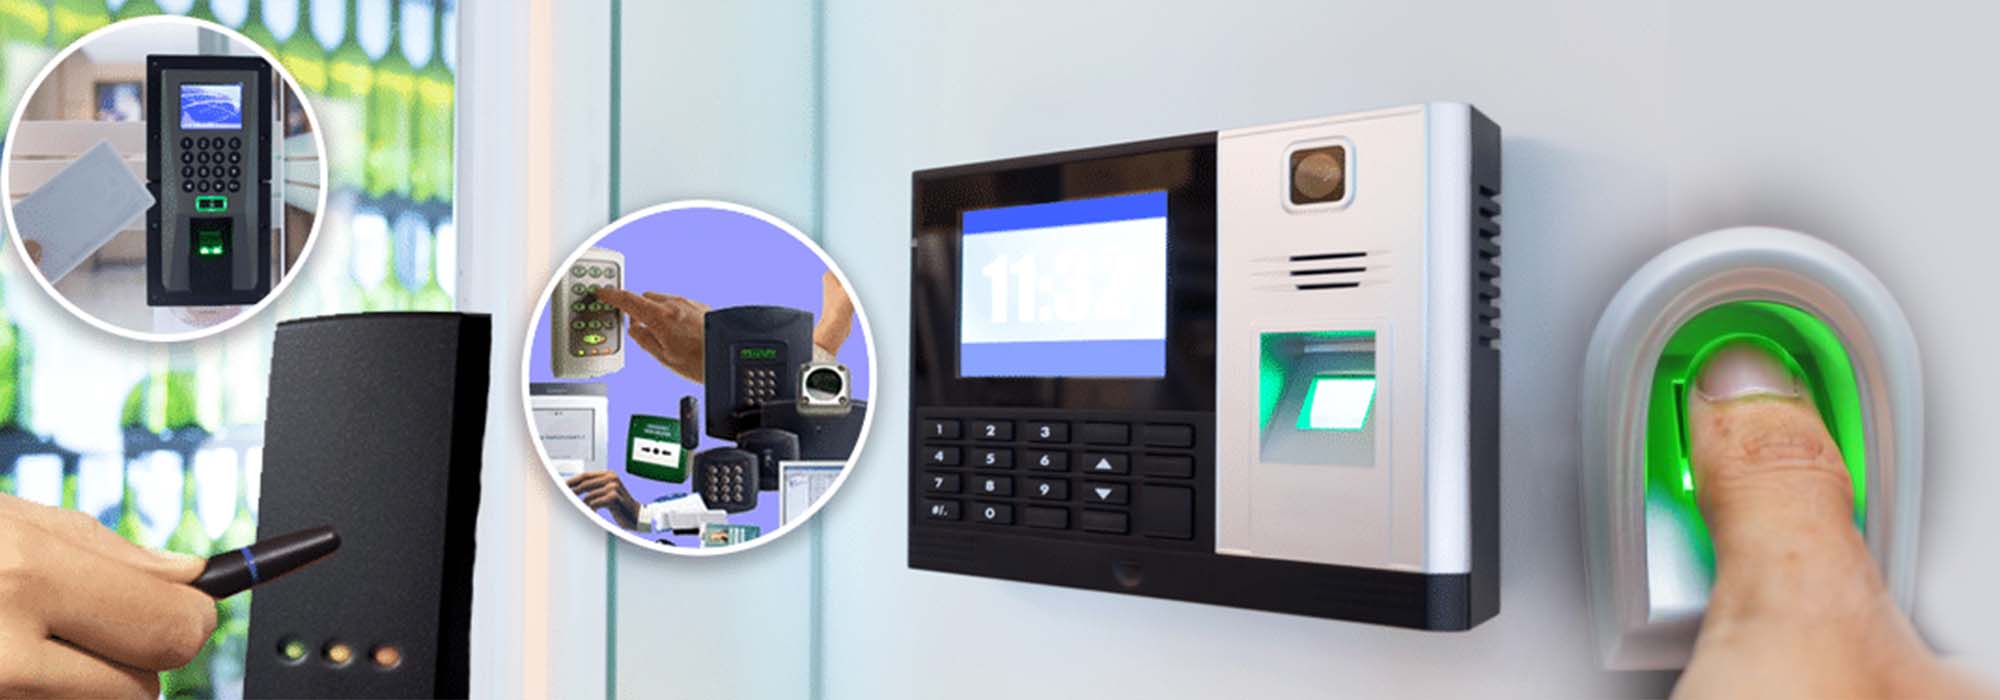 access-control-system-services